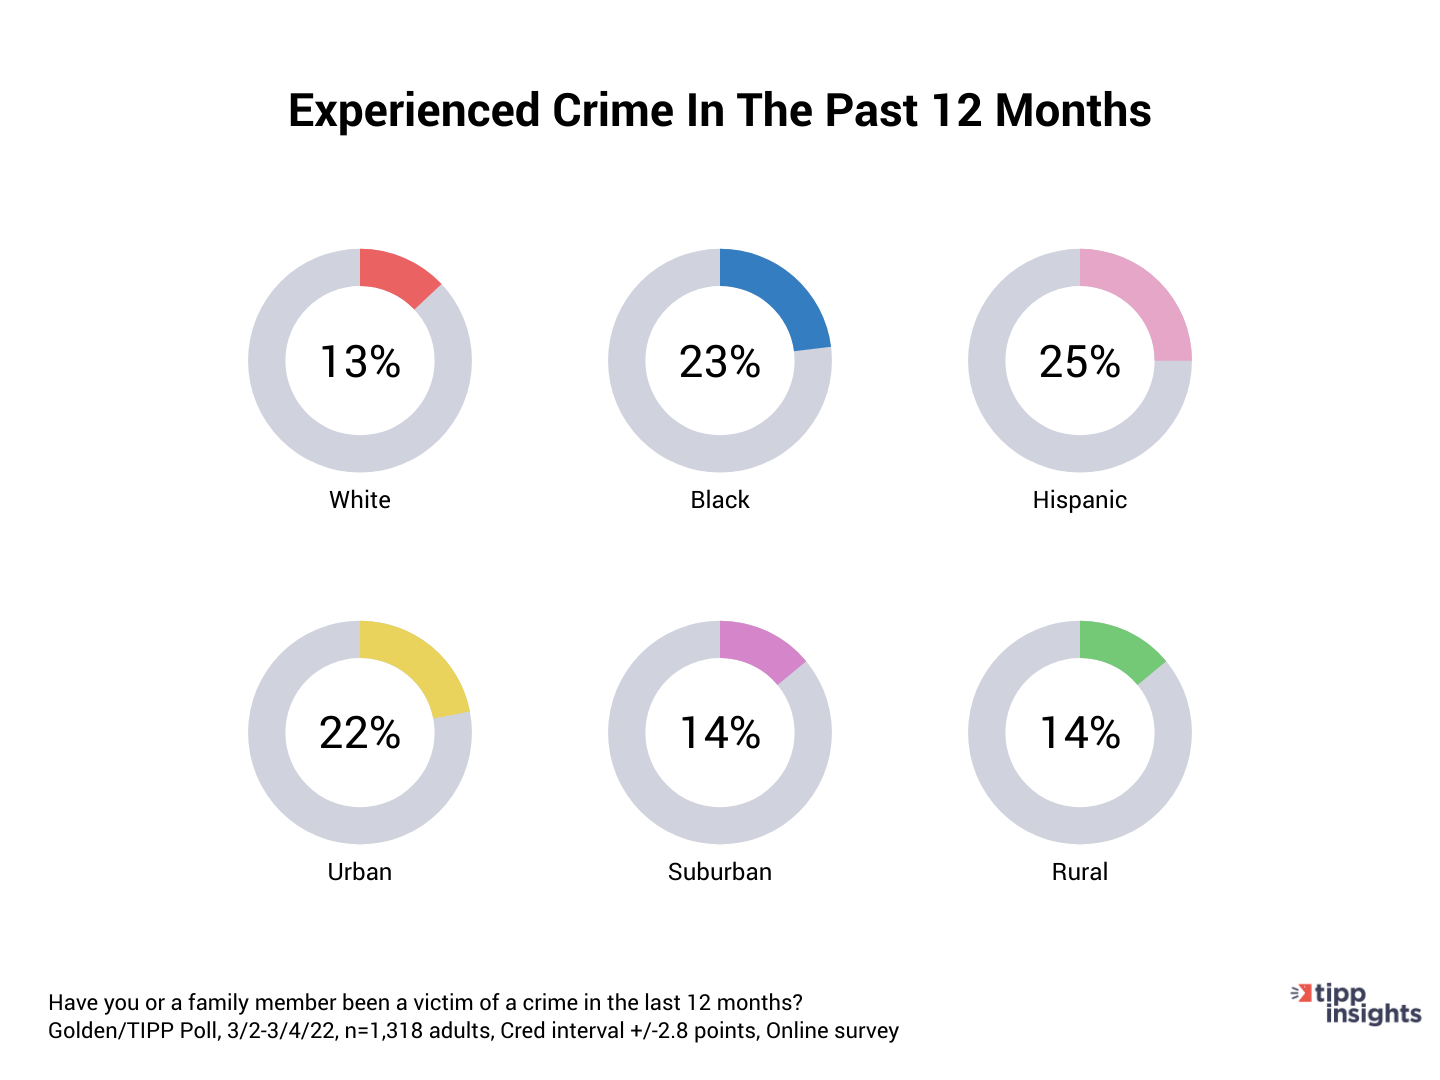 Golden/TIPP Poll Results: How many americans have experienced crime in the past 12 months